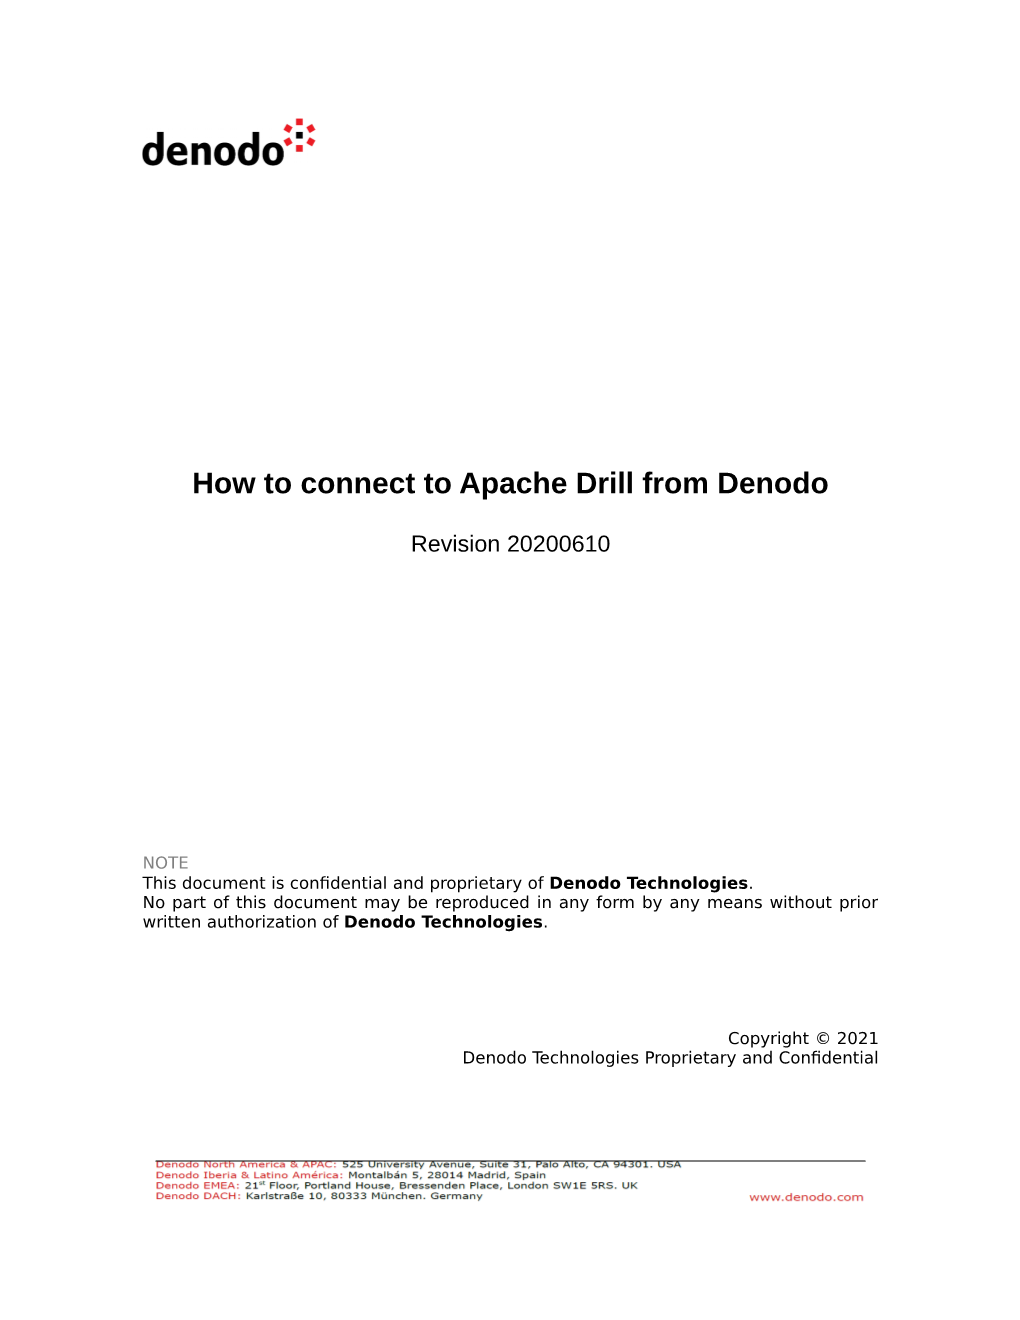 How to Connect to Apache Drill from Denodo